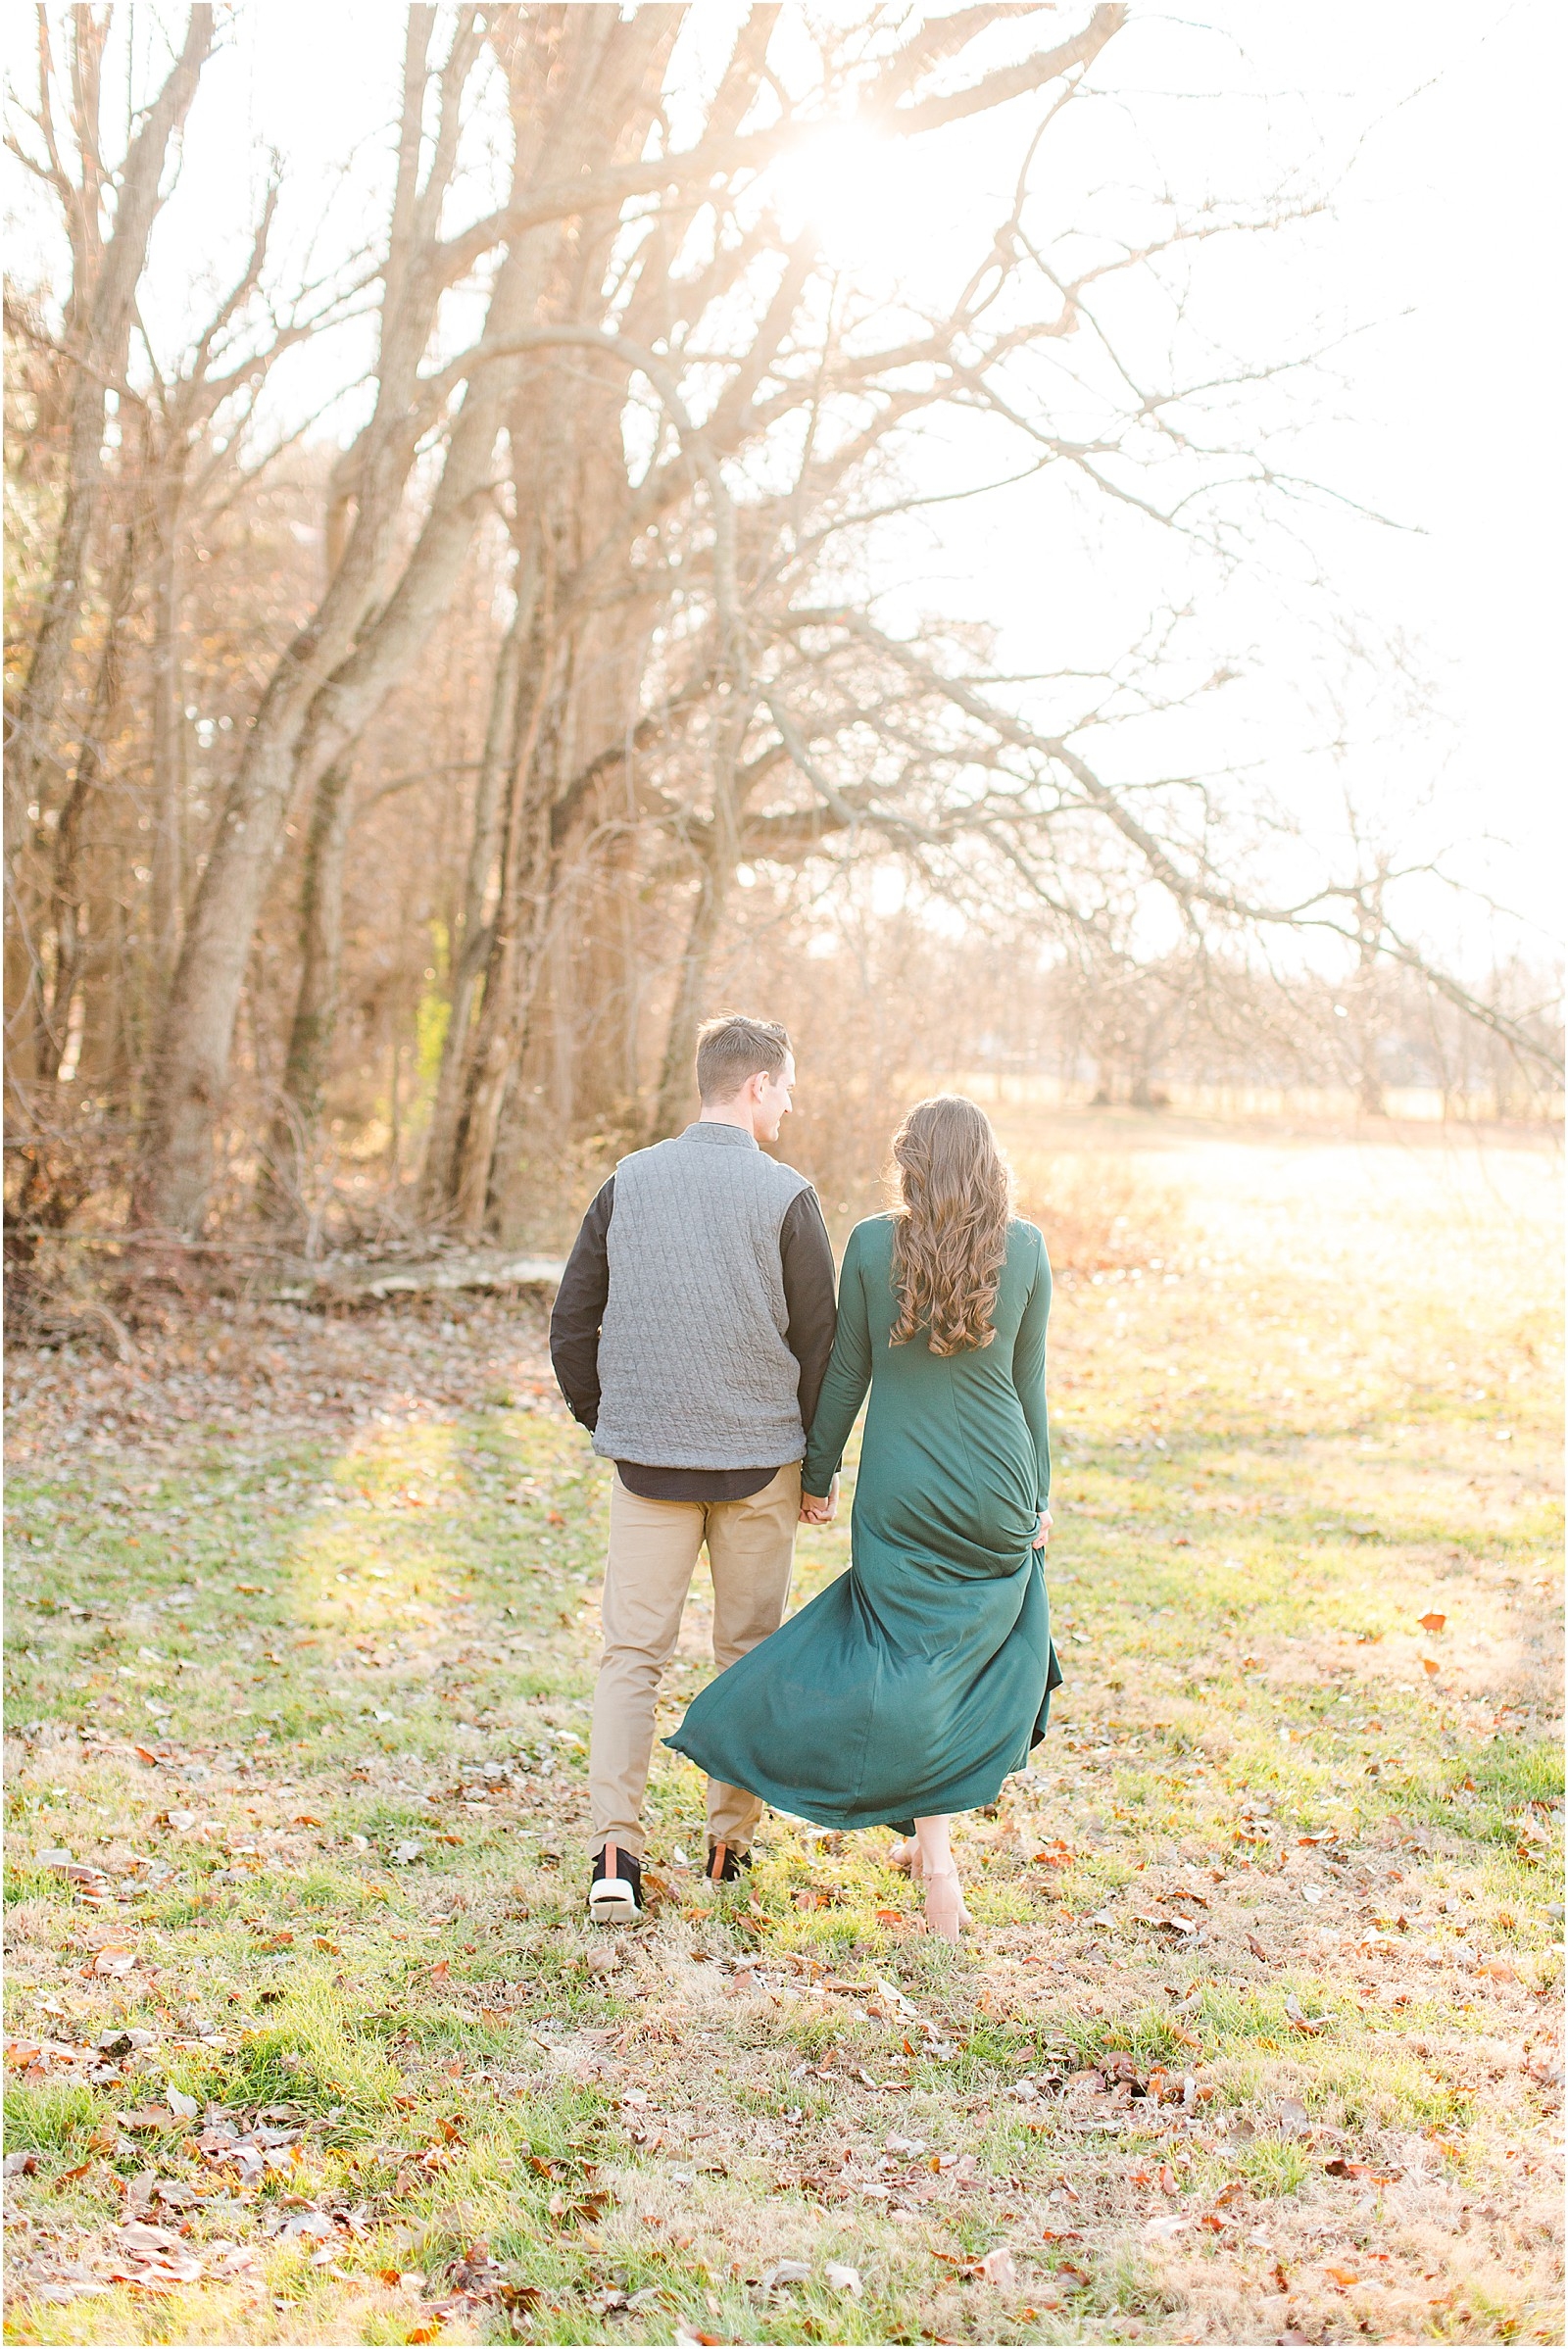 Kaley and Devon's fall Evansville Indiana engagement session. | #fallengagementsession #evansvilleindiana #evansvilleindianawedding | 0008.jpg